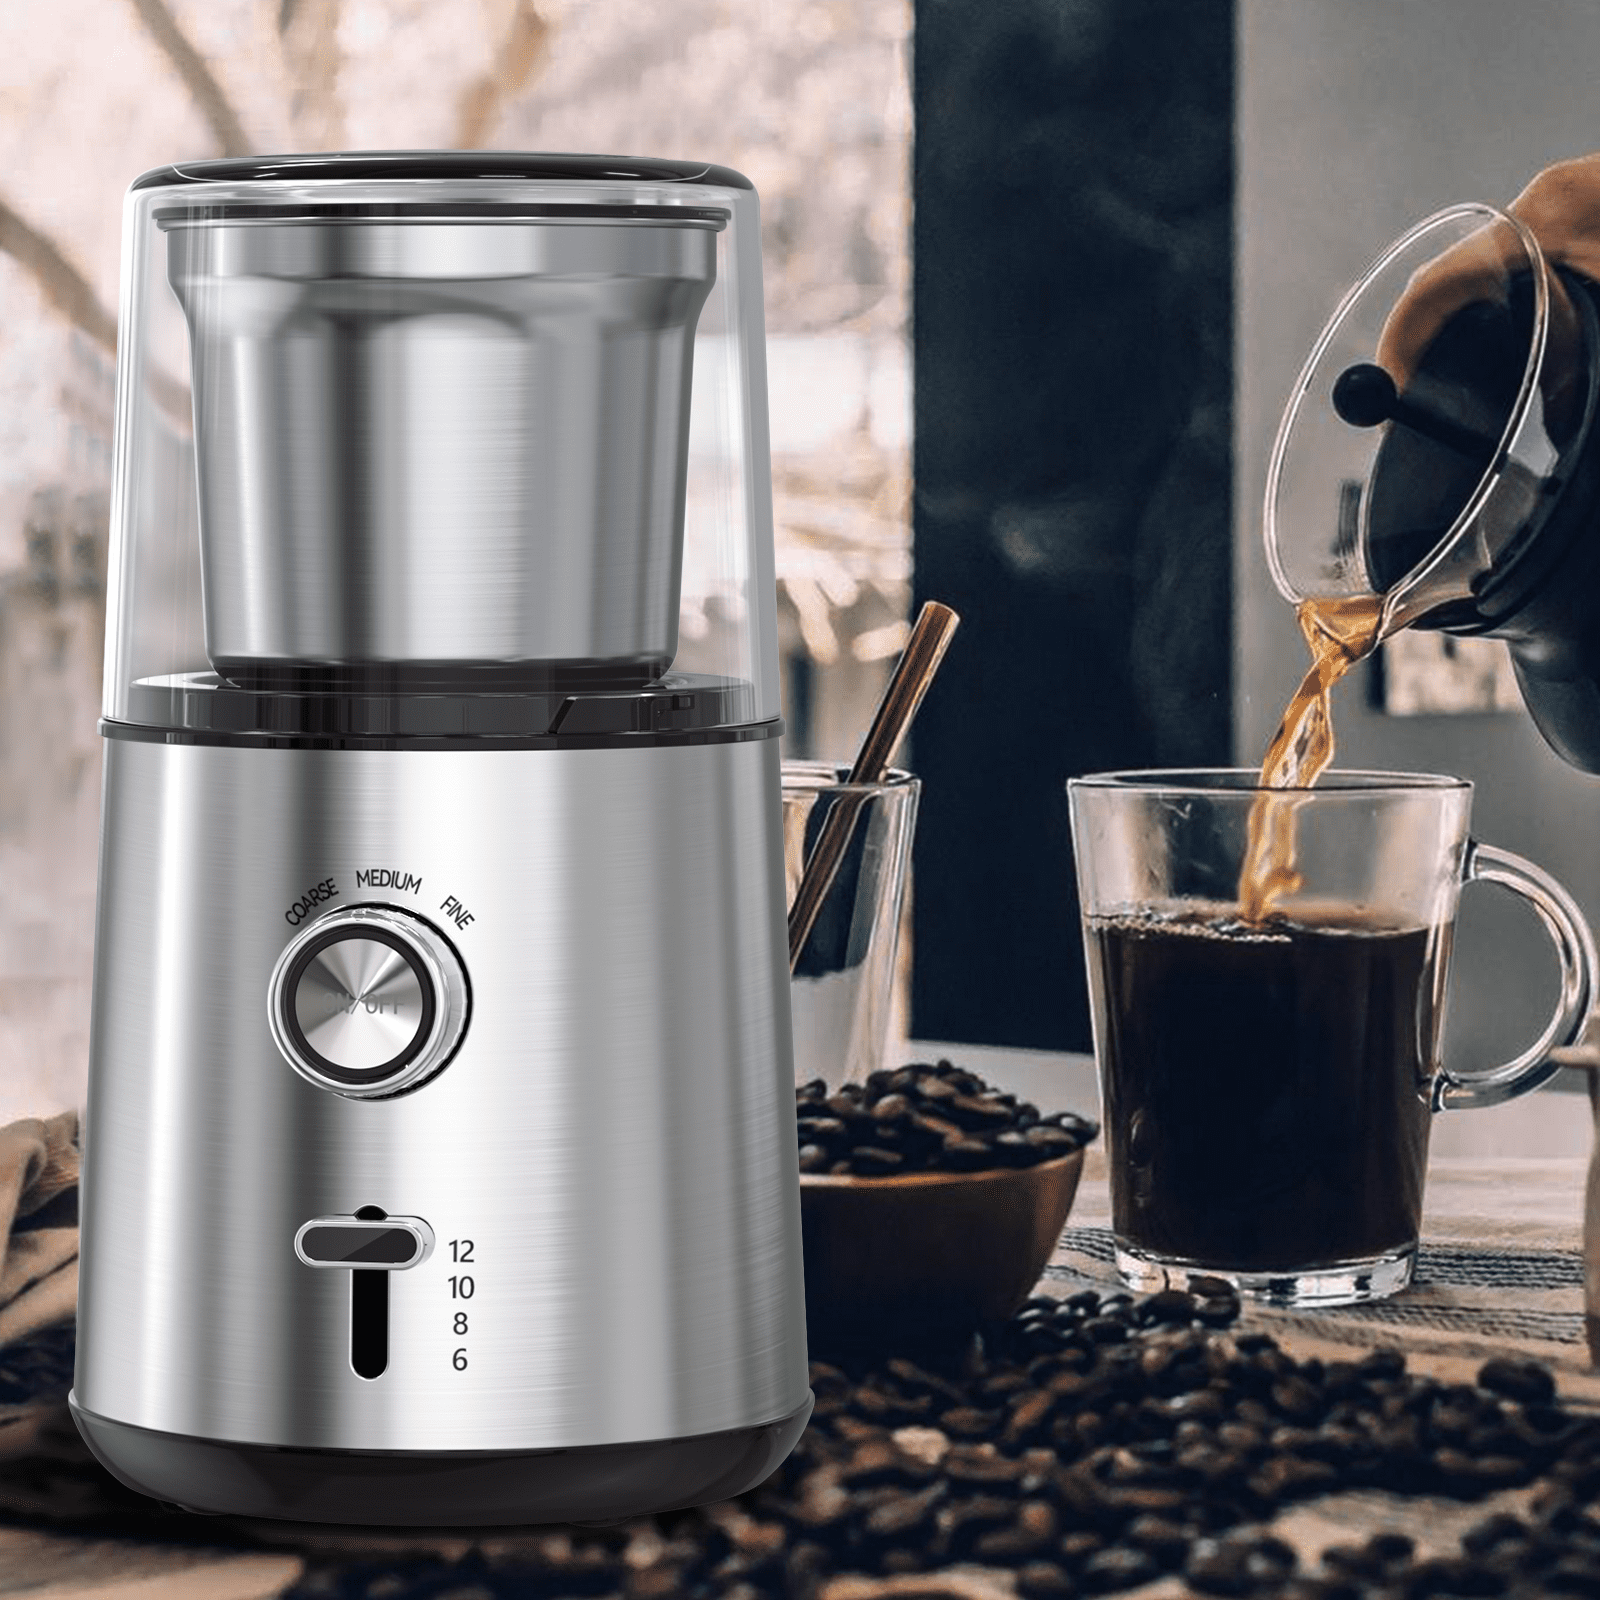 Lofter HY-1422 Electric Coffee Grinder, 200W Detachable Spice Grinder with  2 Removable Grinding Bowls, 2.5 Ounce Compact Coffee Grinders with